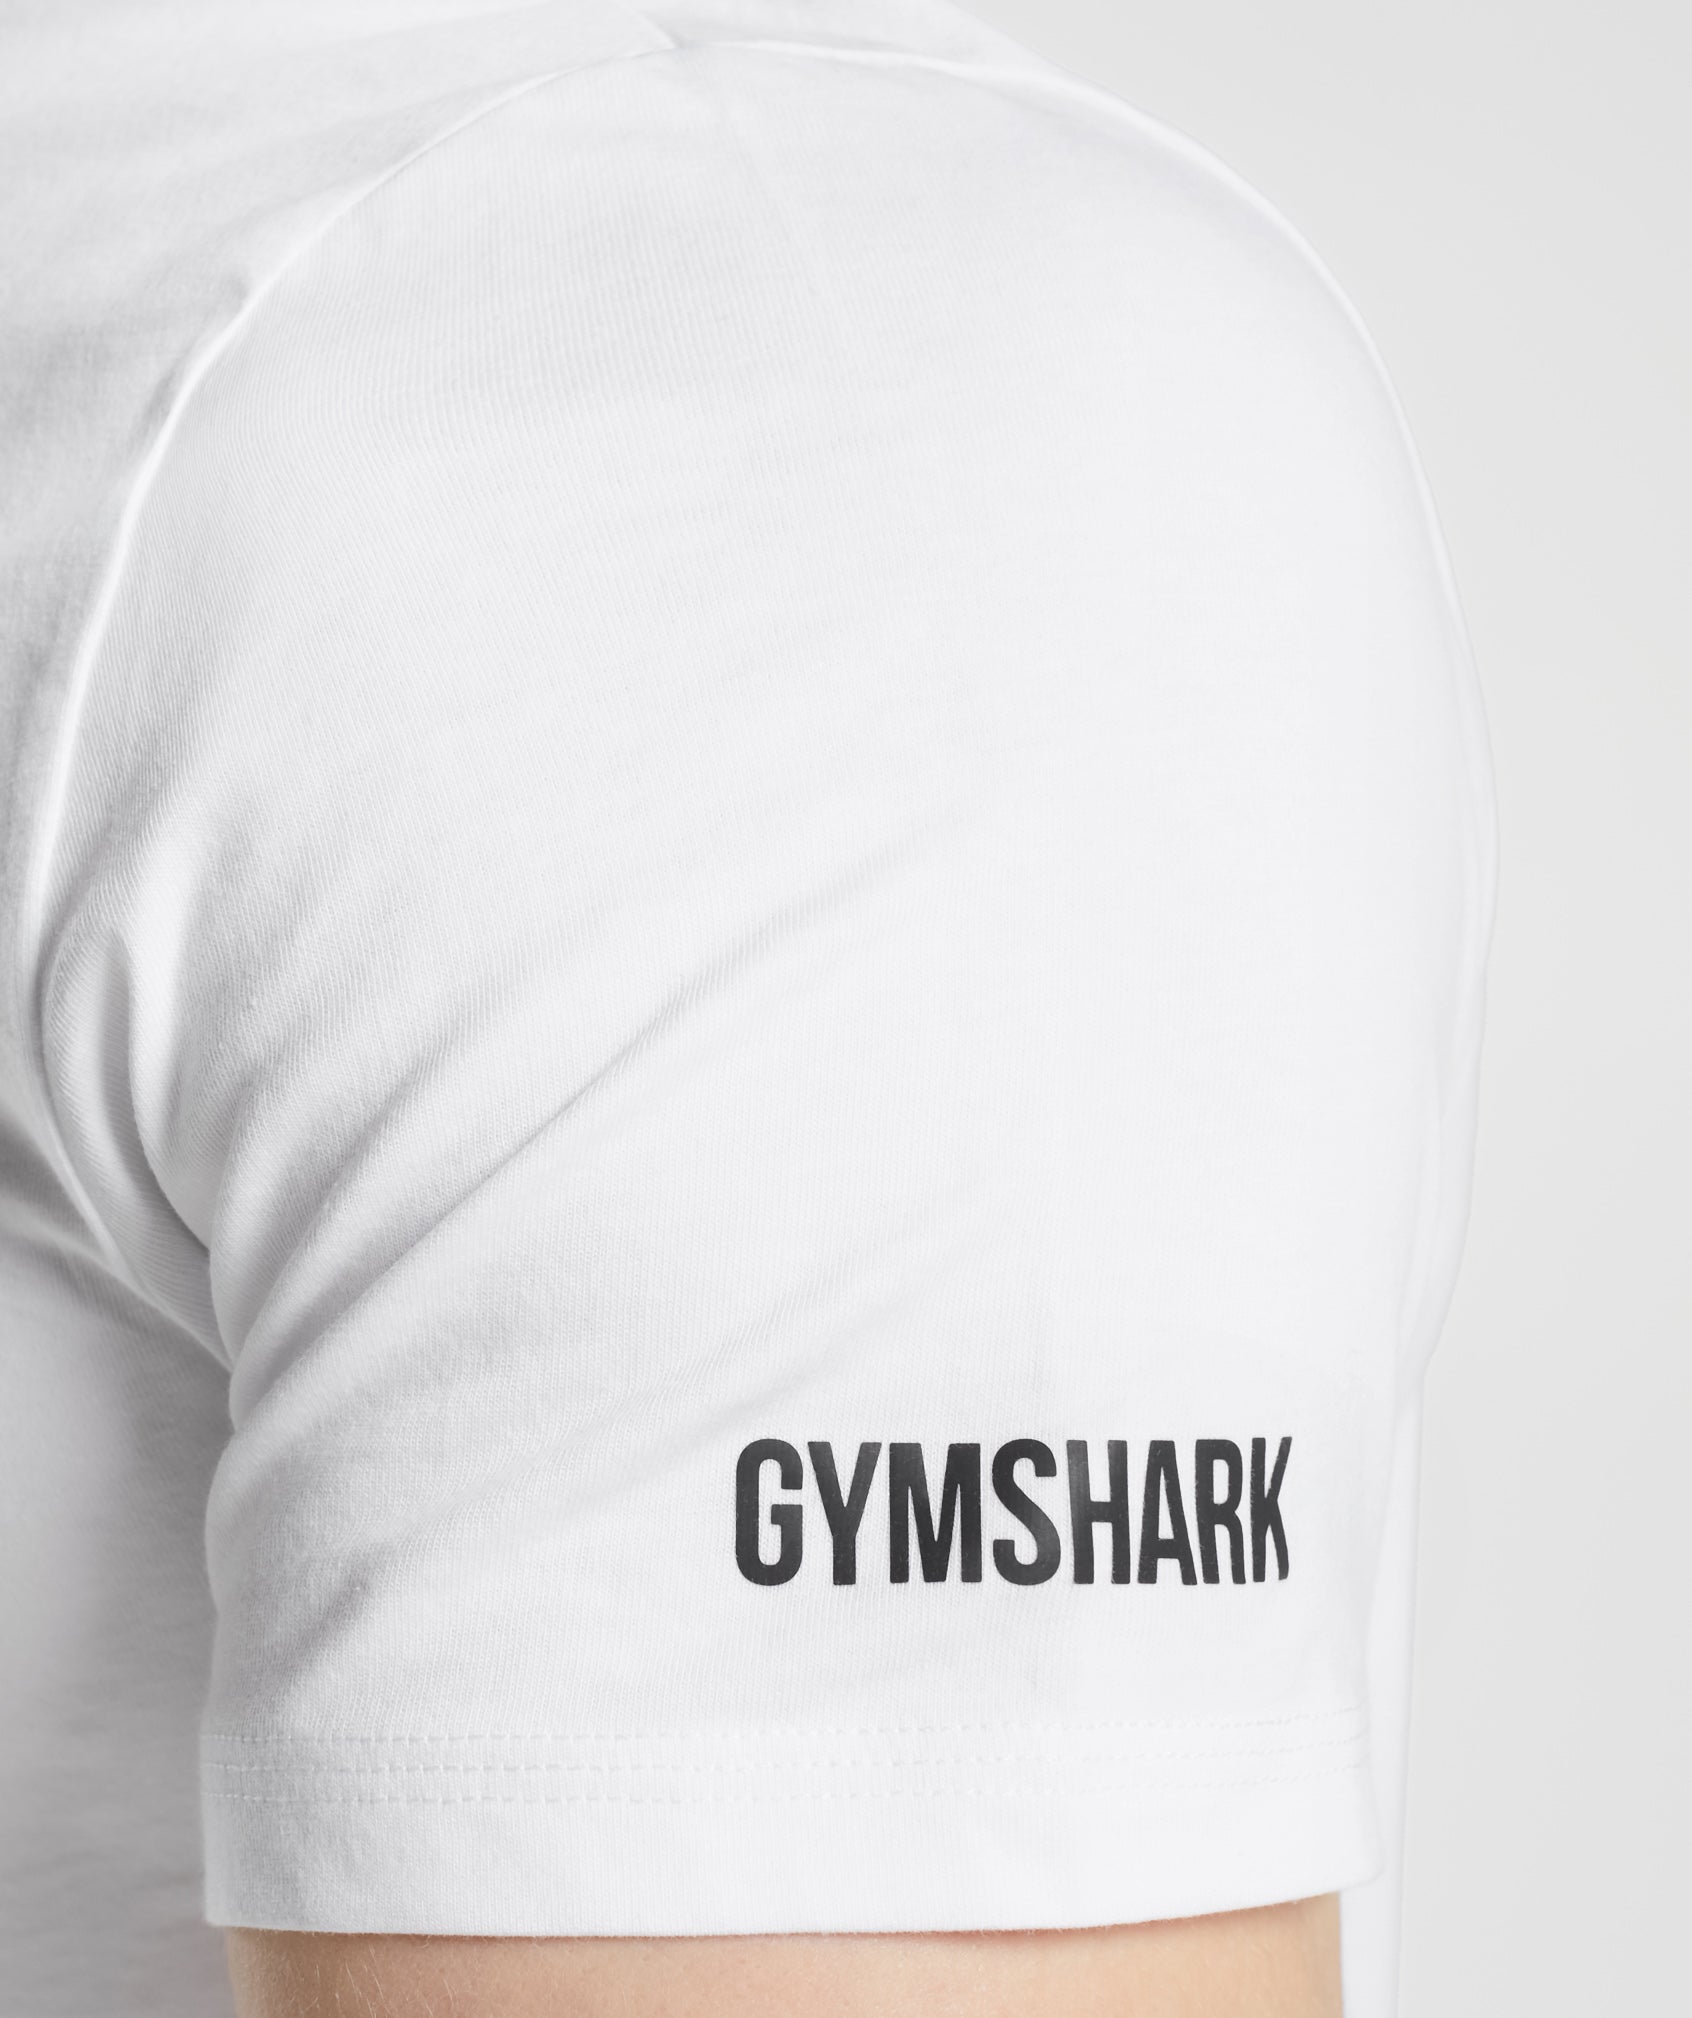 Gymshark x David Laid Cargo Pants - Size XL - Impossible to find ! Won't  restock